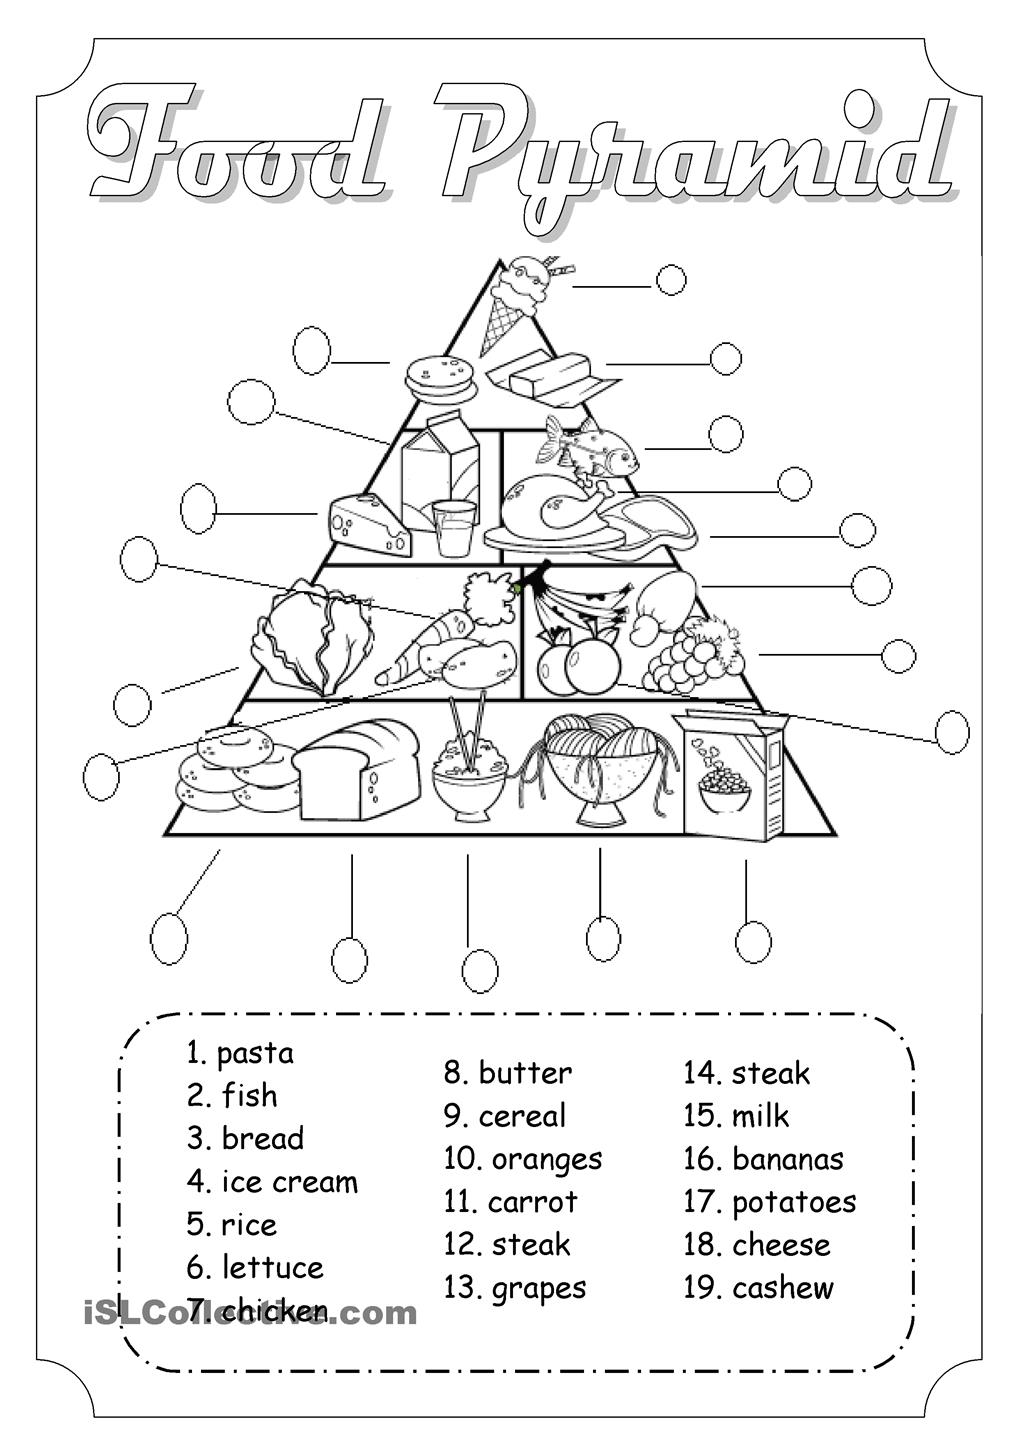 15-best-images-of-healthy-food-cut-and-paste-worksheets-food-pyramid-coloring-healthy-food